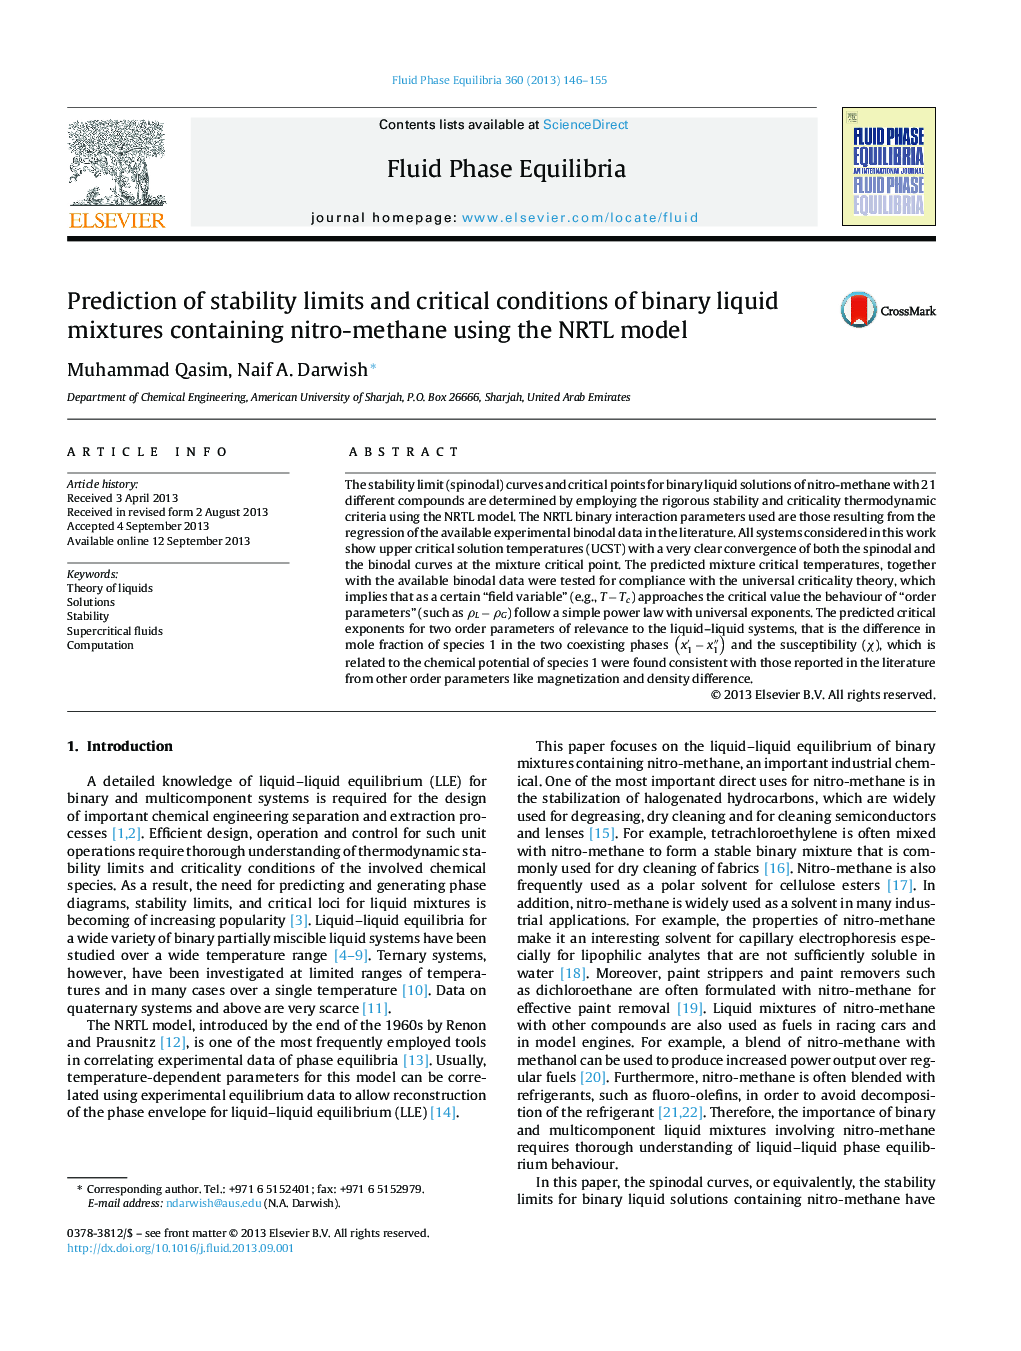 Prediction of stability limits and critical conditions of binary liquid mixtures containing nitro-methane using the NRTL model